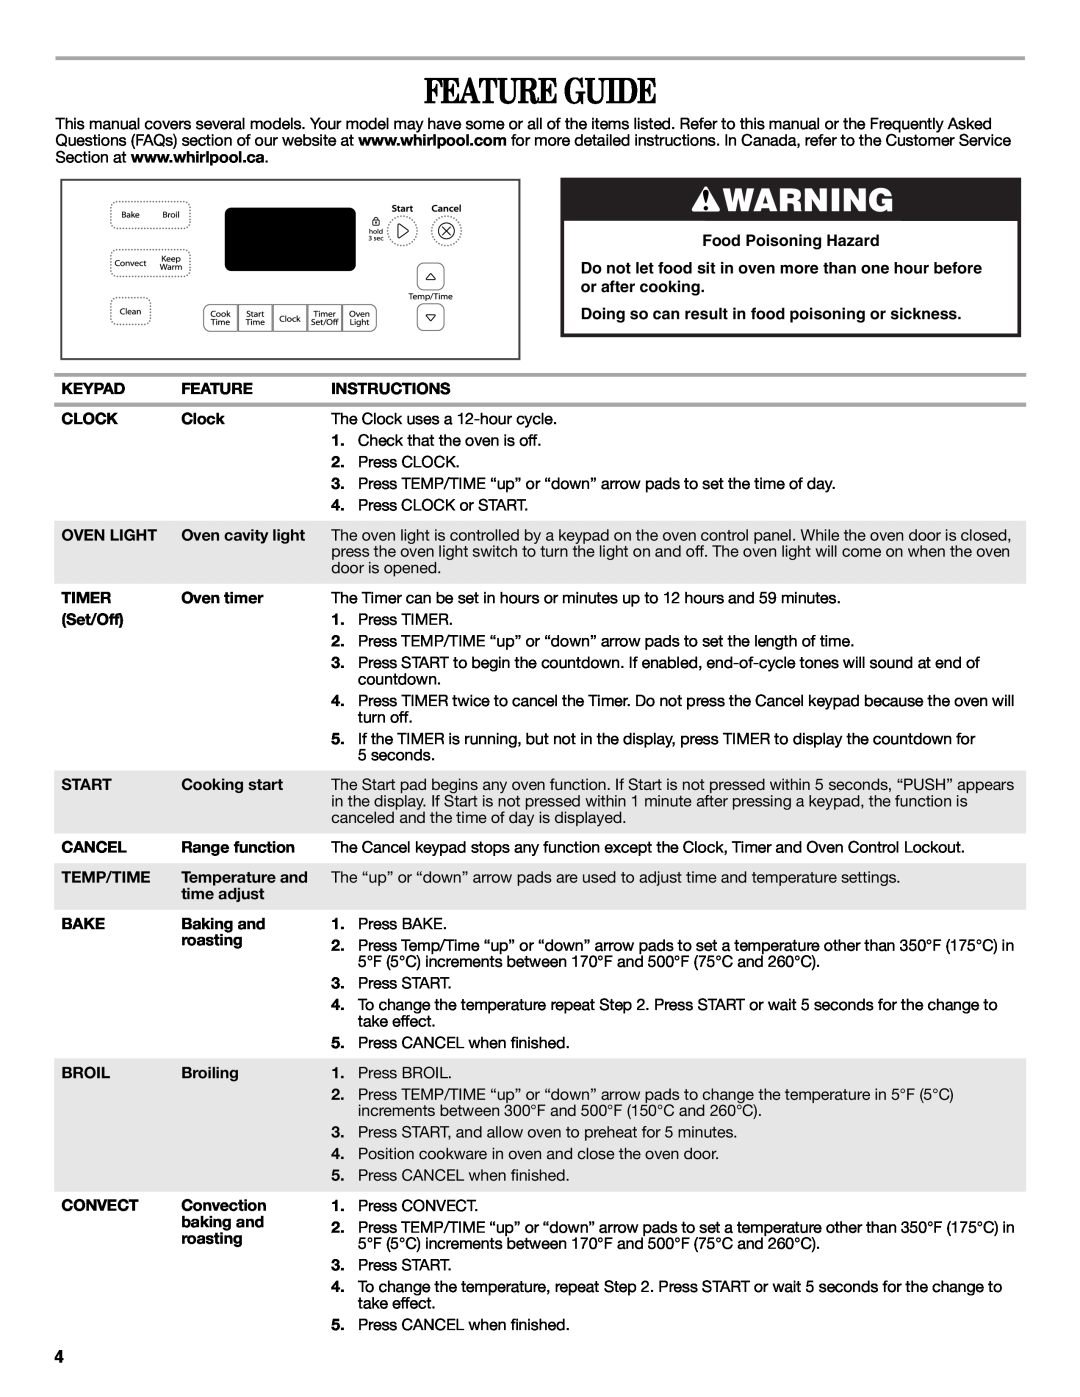 Whirlpool WFG540H0AS, W10392927A, WFG520S0AW, WFG540H0AW, WFG540H0AB Feature Guide, Food Poisoning Hazard, or after cooking 